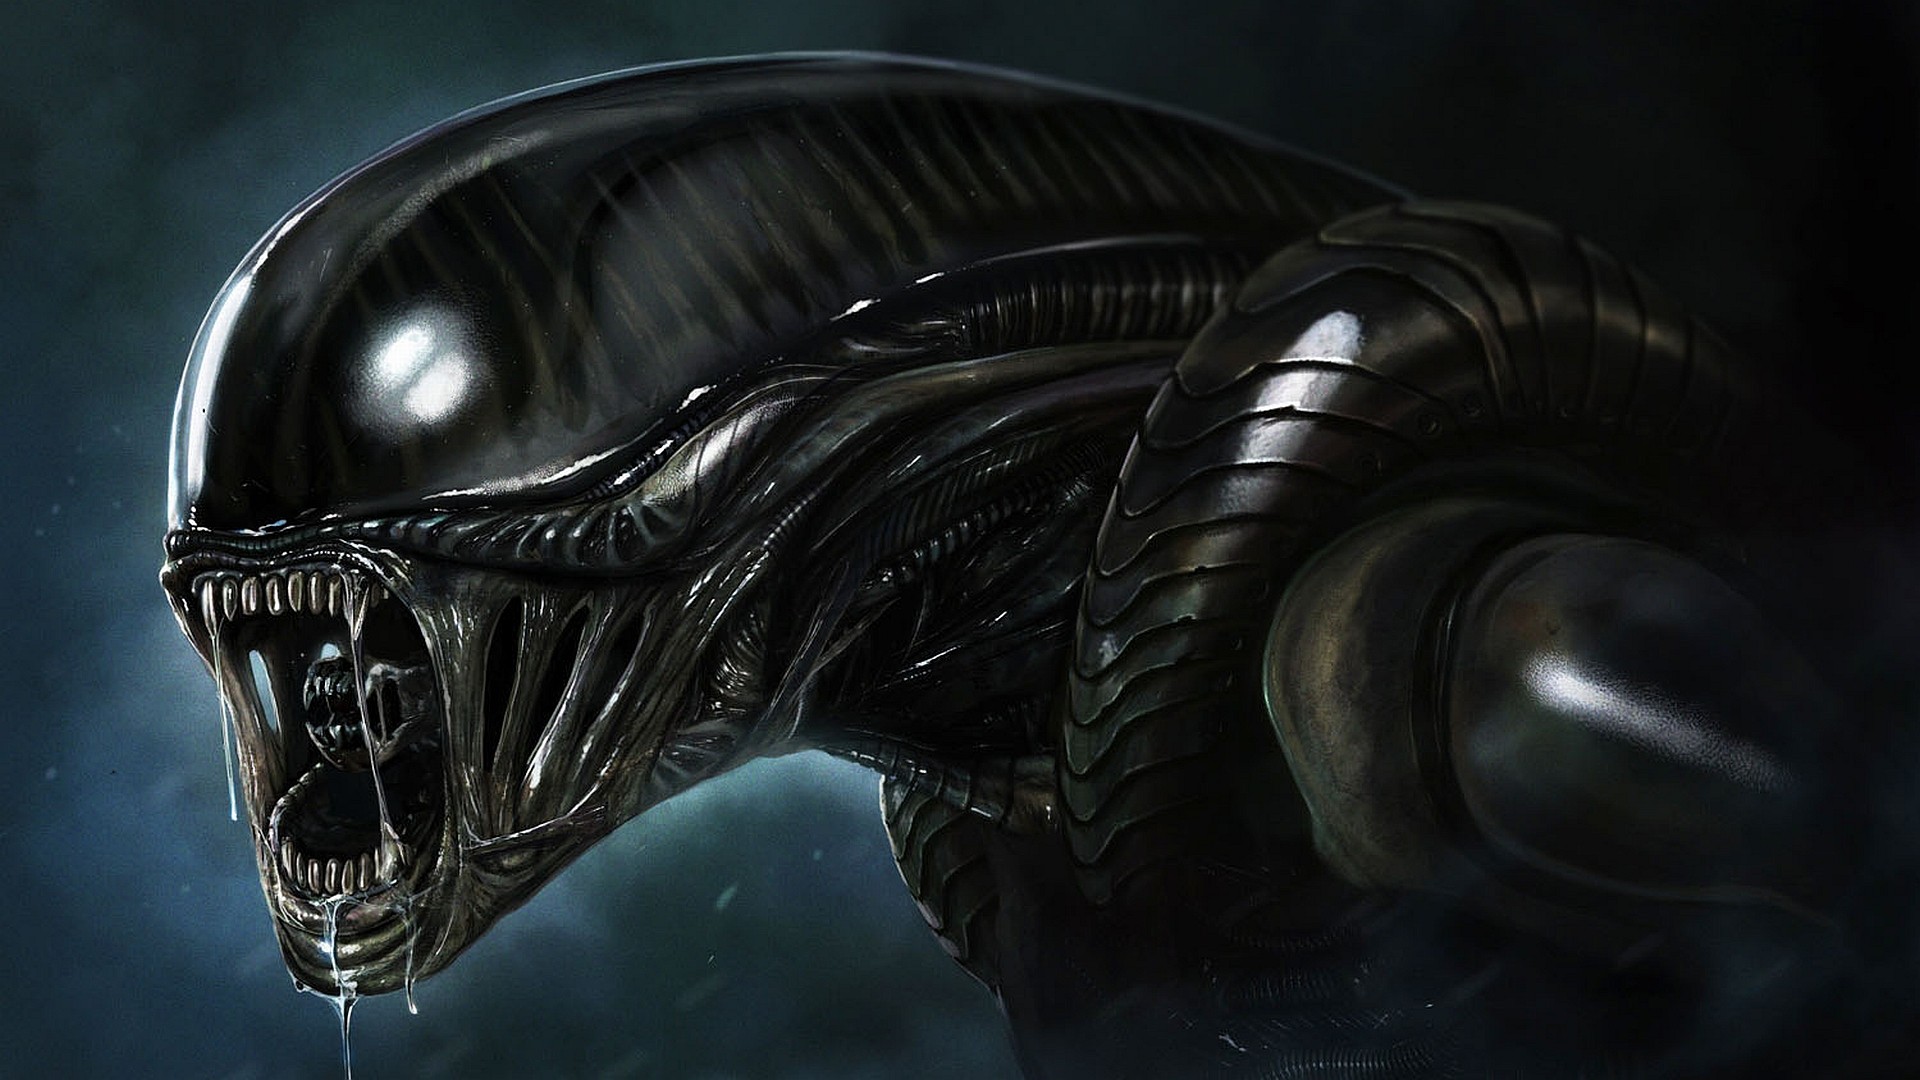 Aliens wallpaper ·① Download free full HD backgrounds for ...